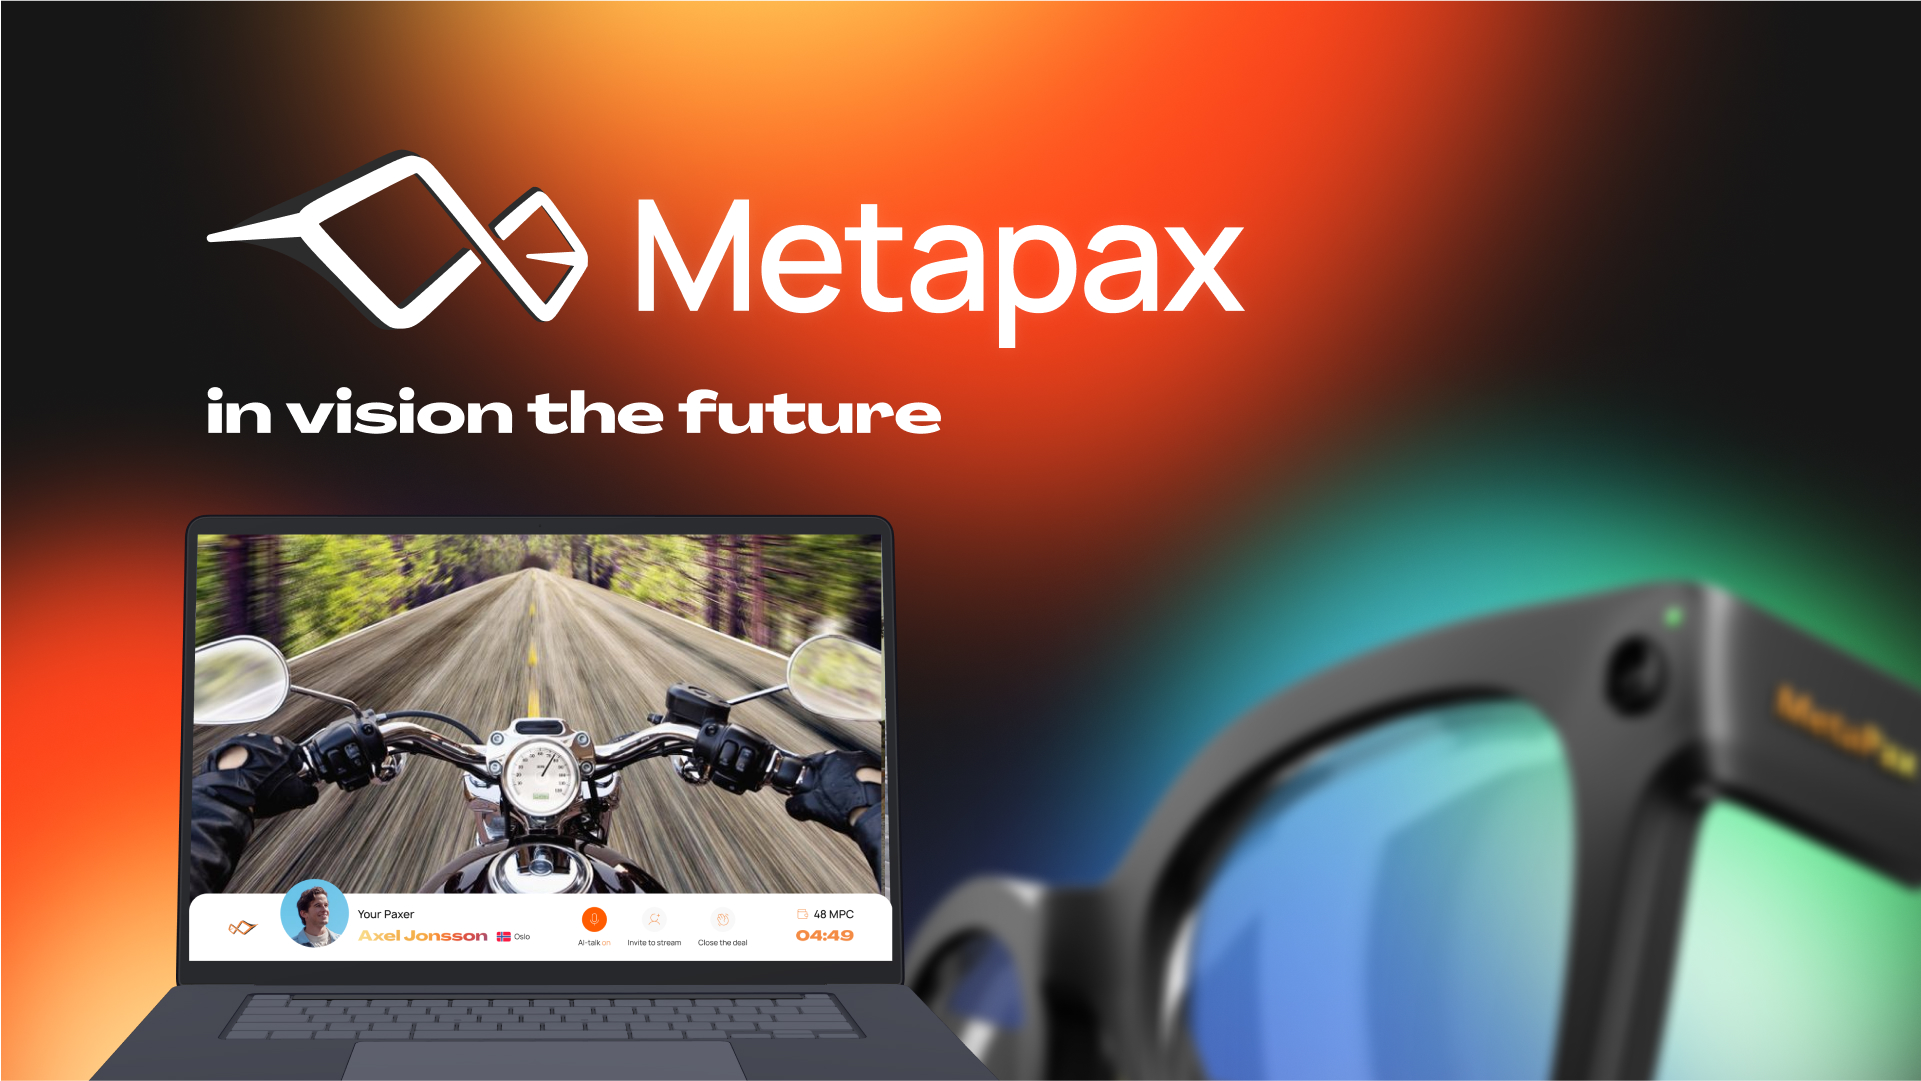 MetaPax- A Unique Fundamental Project Transforming the Way the World Sees!